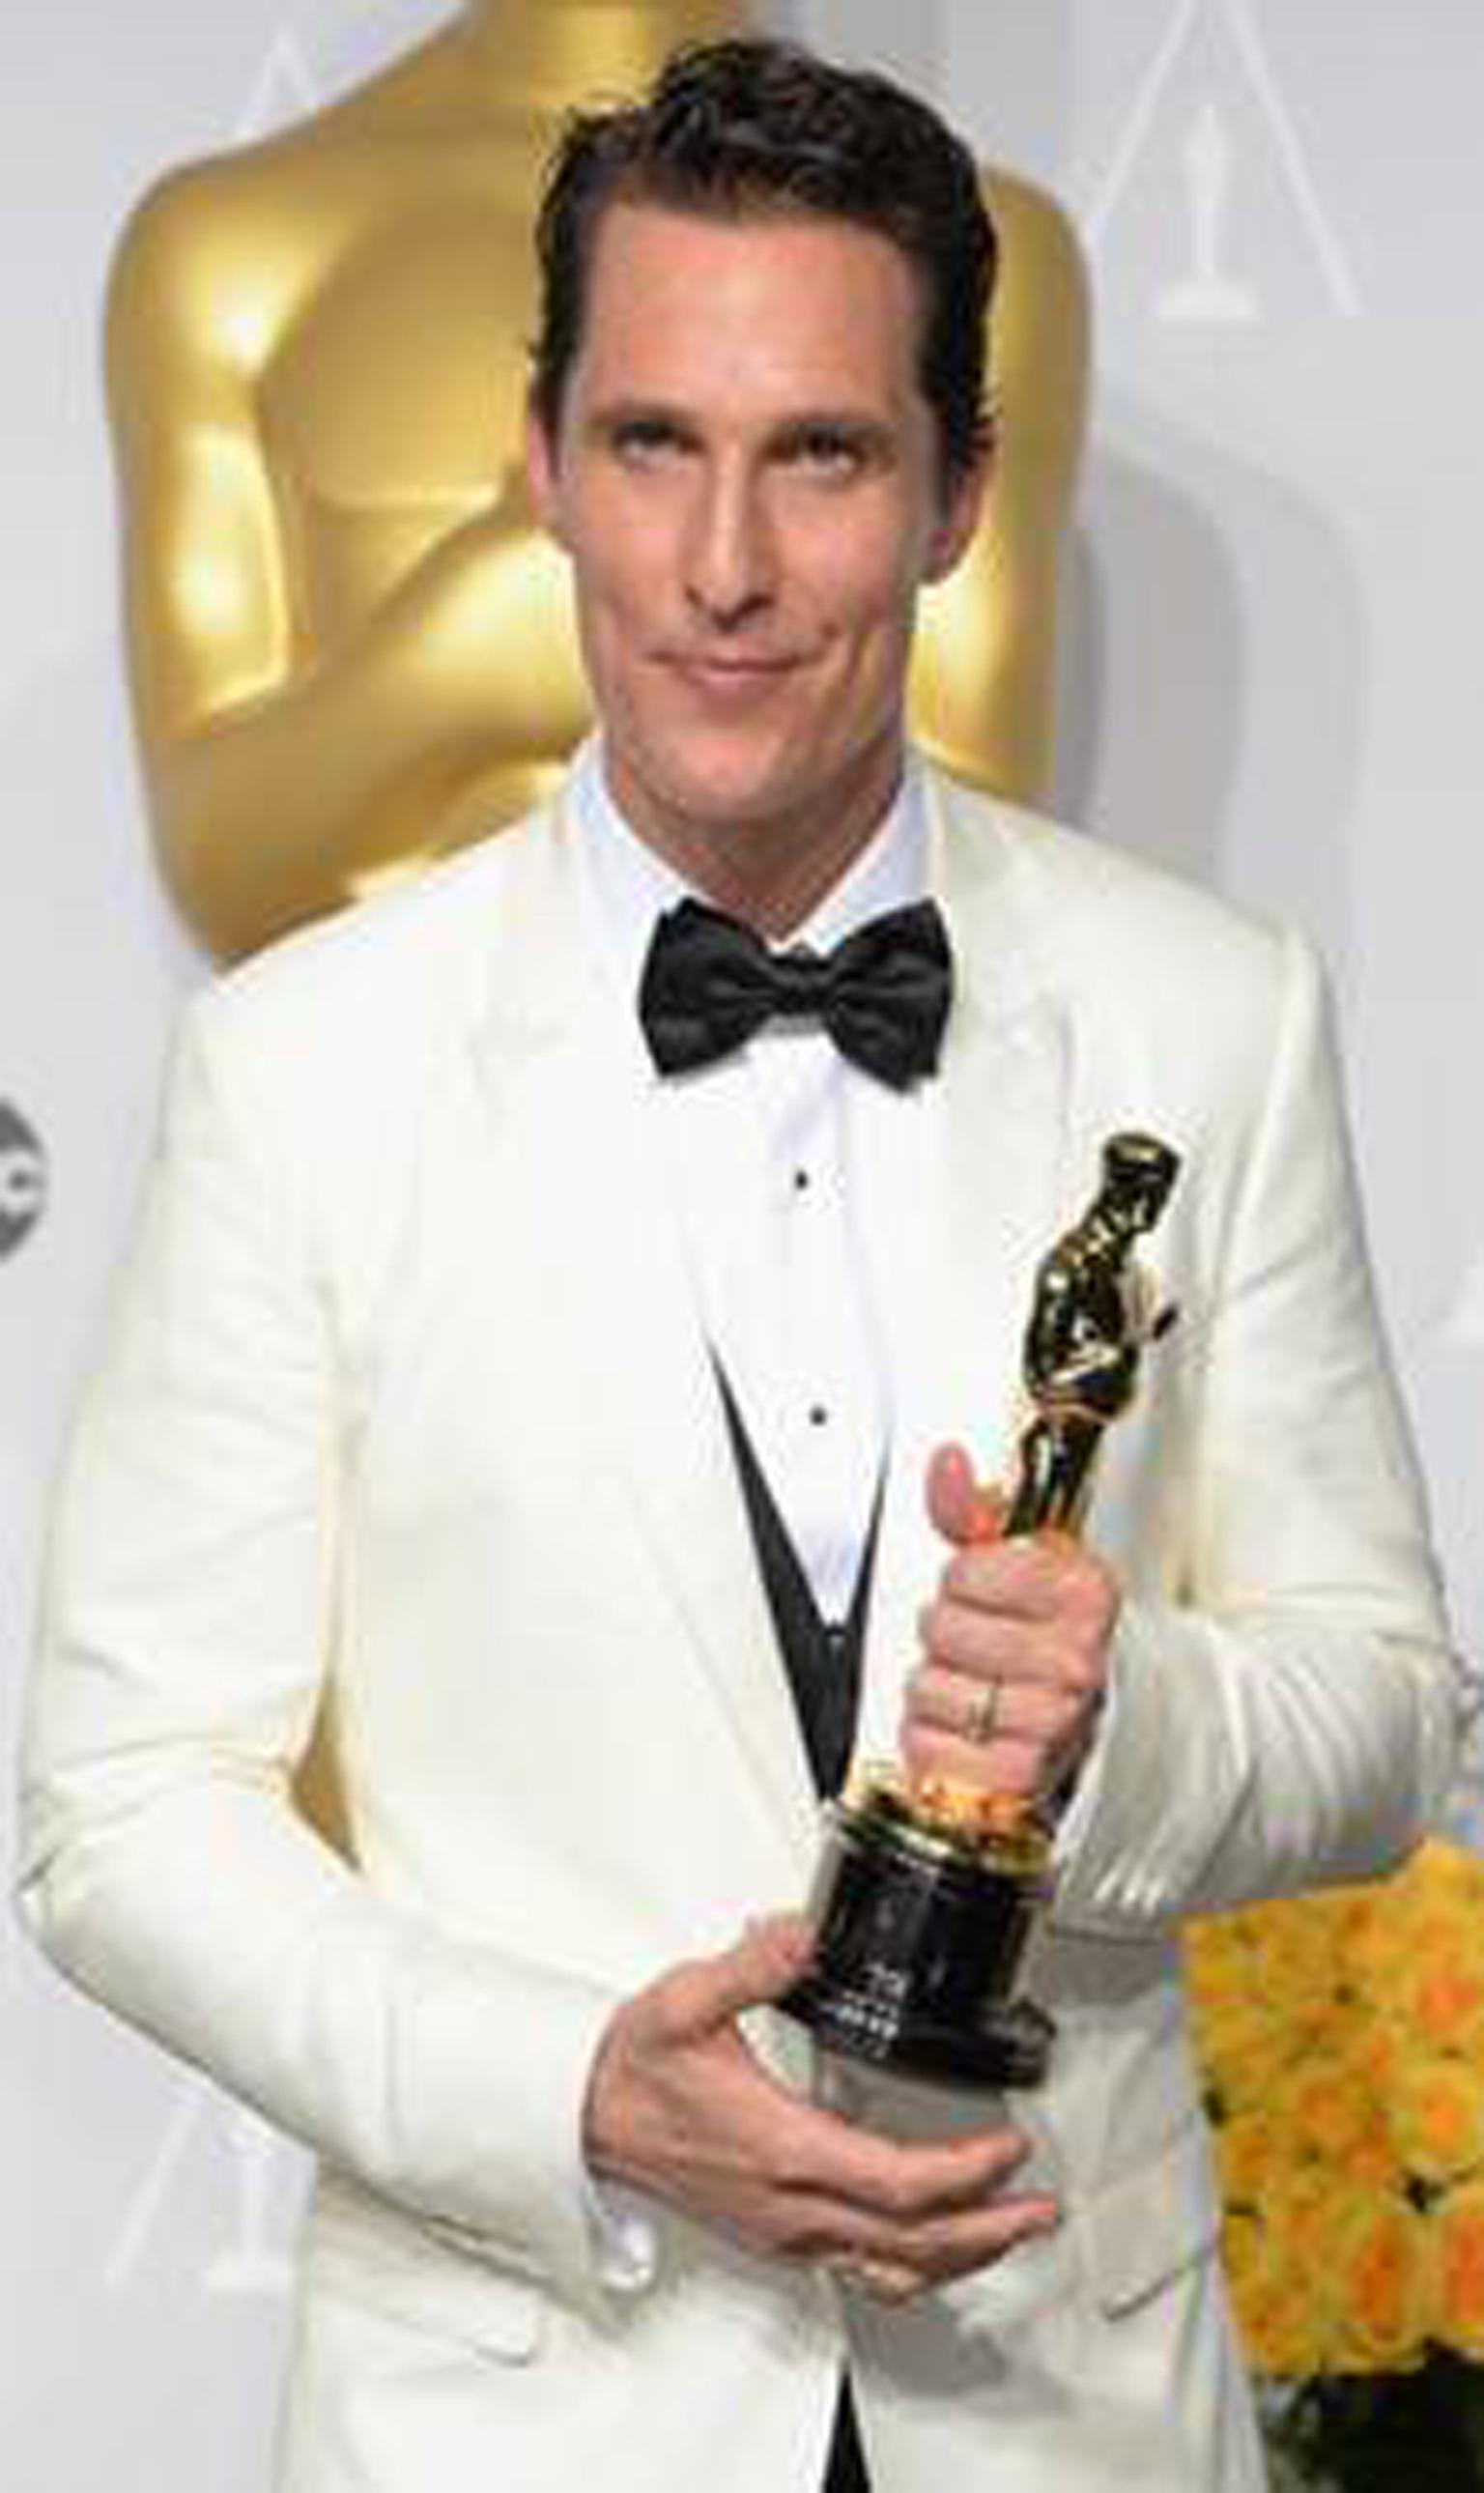 Academy Award Winner for Best Actor in a Leading Role, Matthew McConaughey selected Chopard's white gold L.U.C XP Tonneau timepiece featuring a white dial and black leather strap.